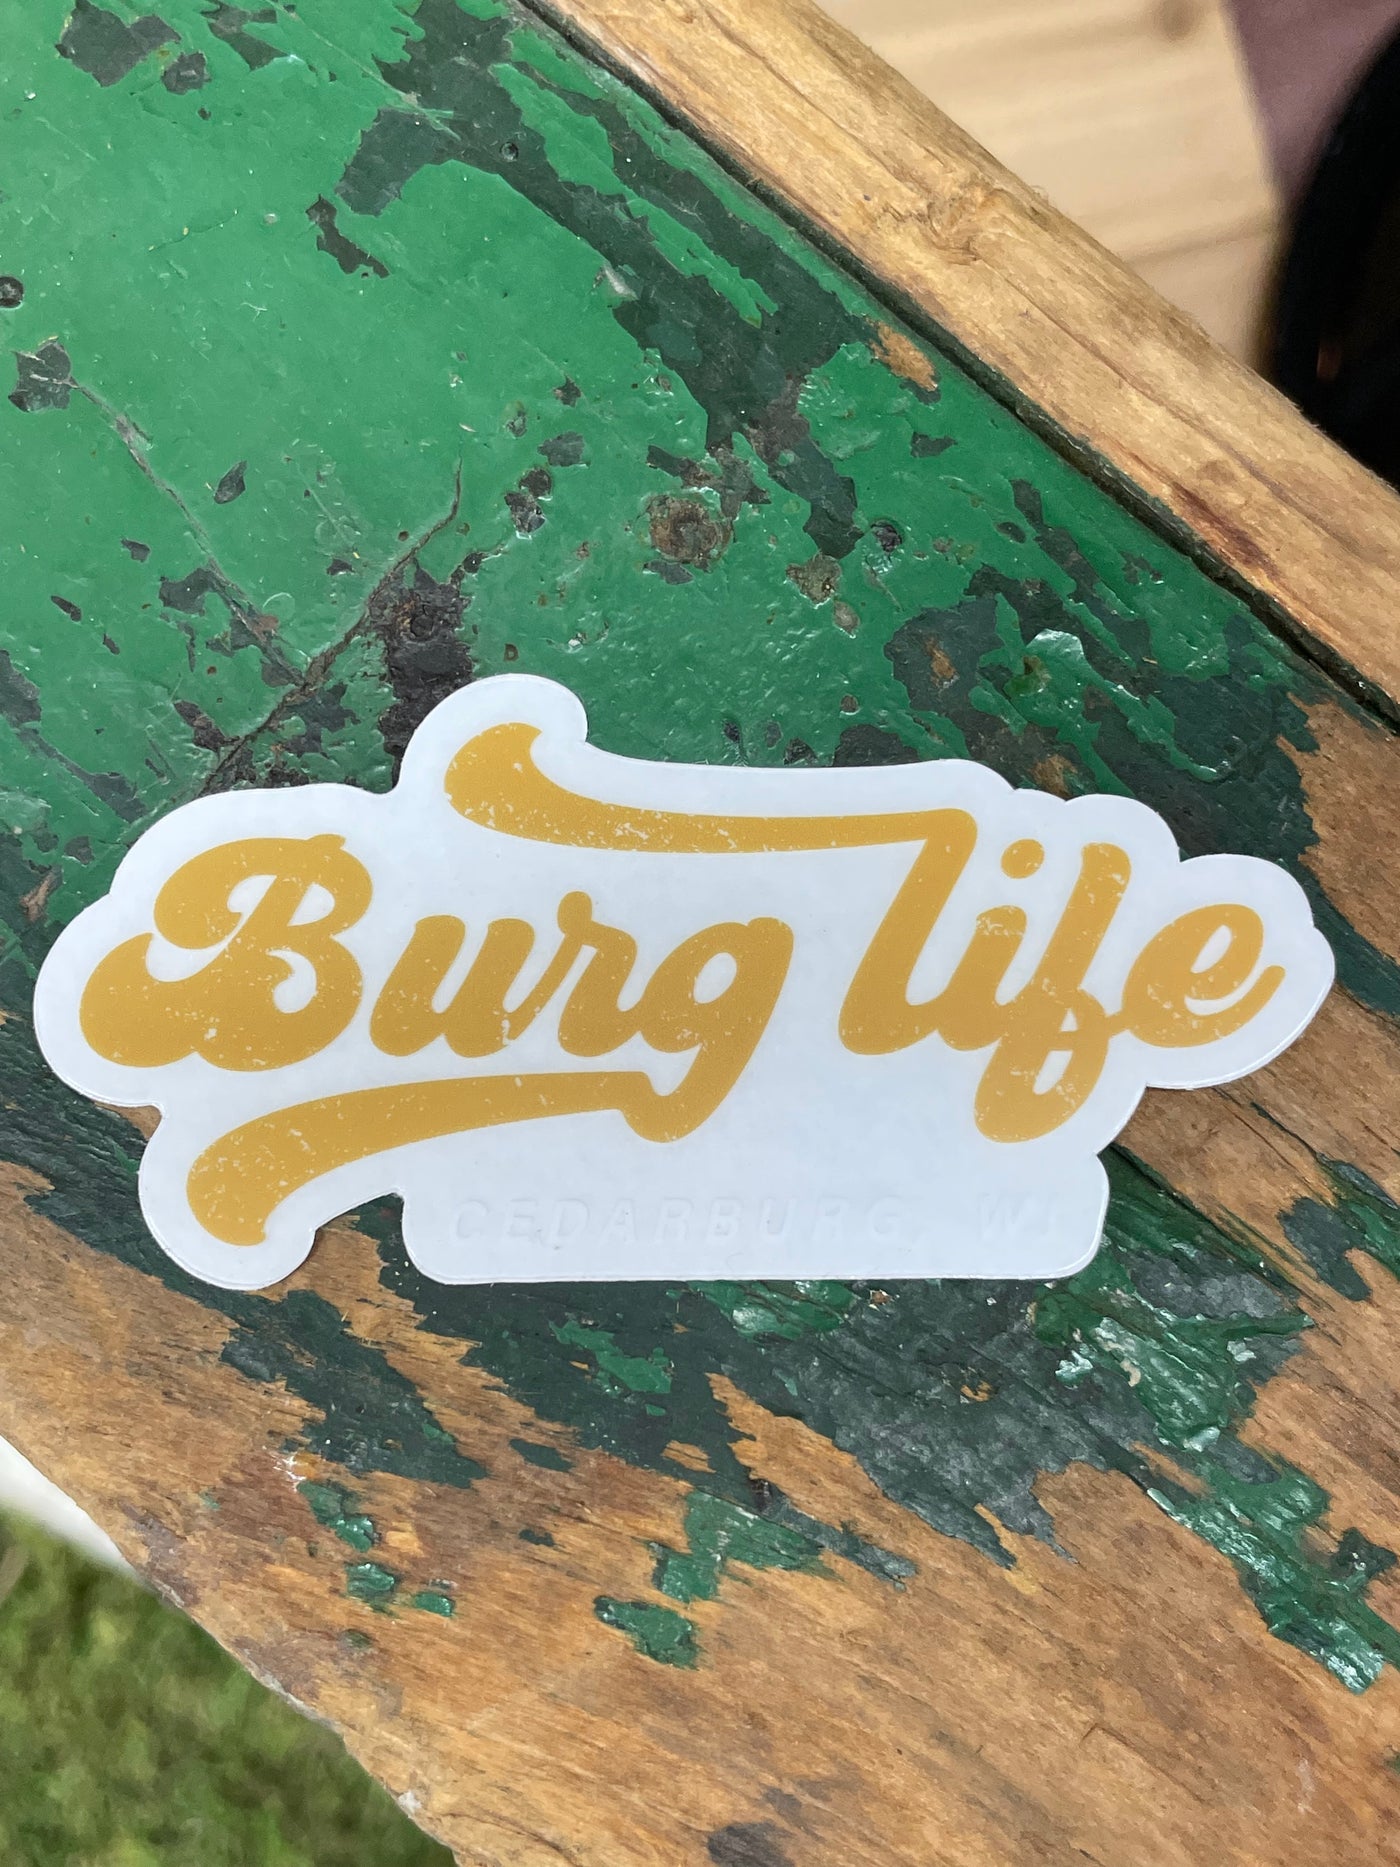 Burg Life Clear Vinyl Sticker with yellow printing